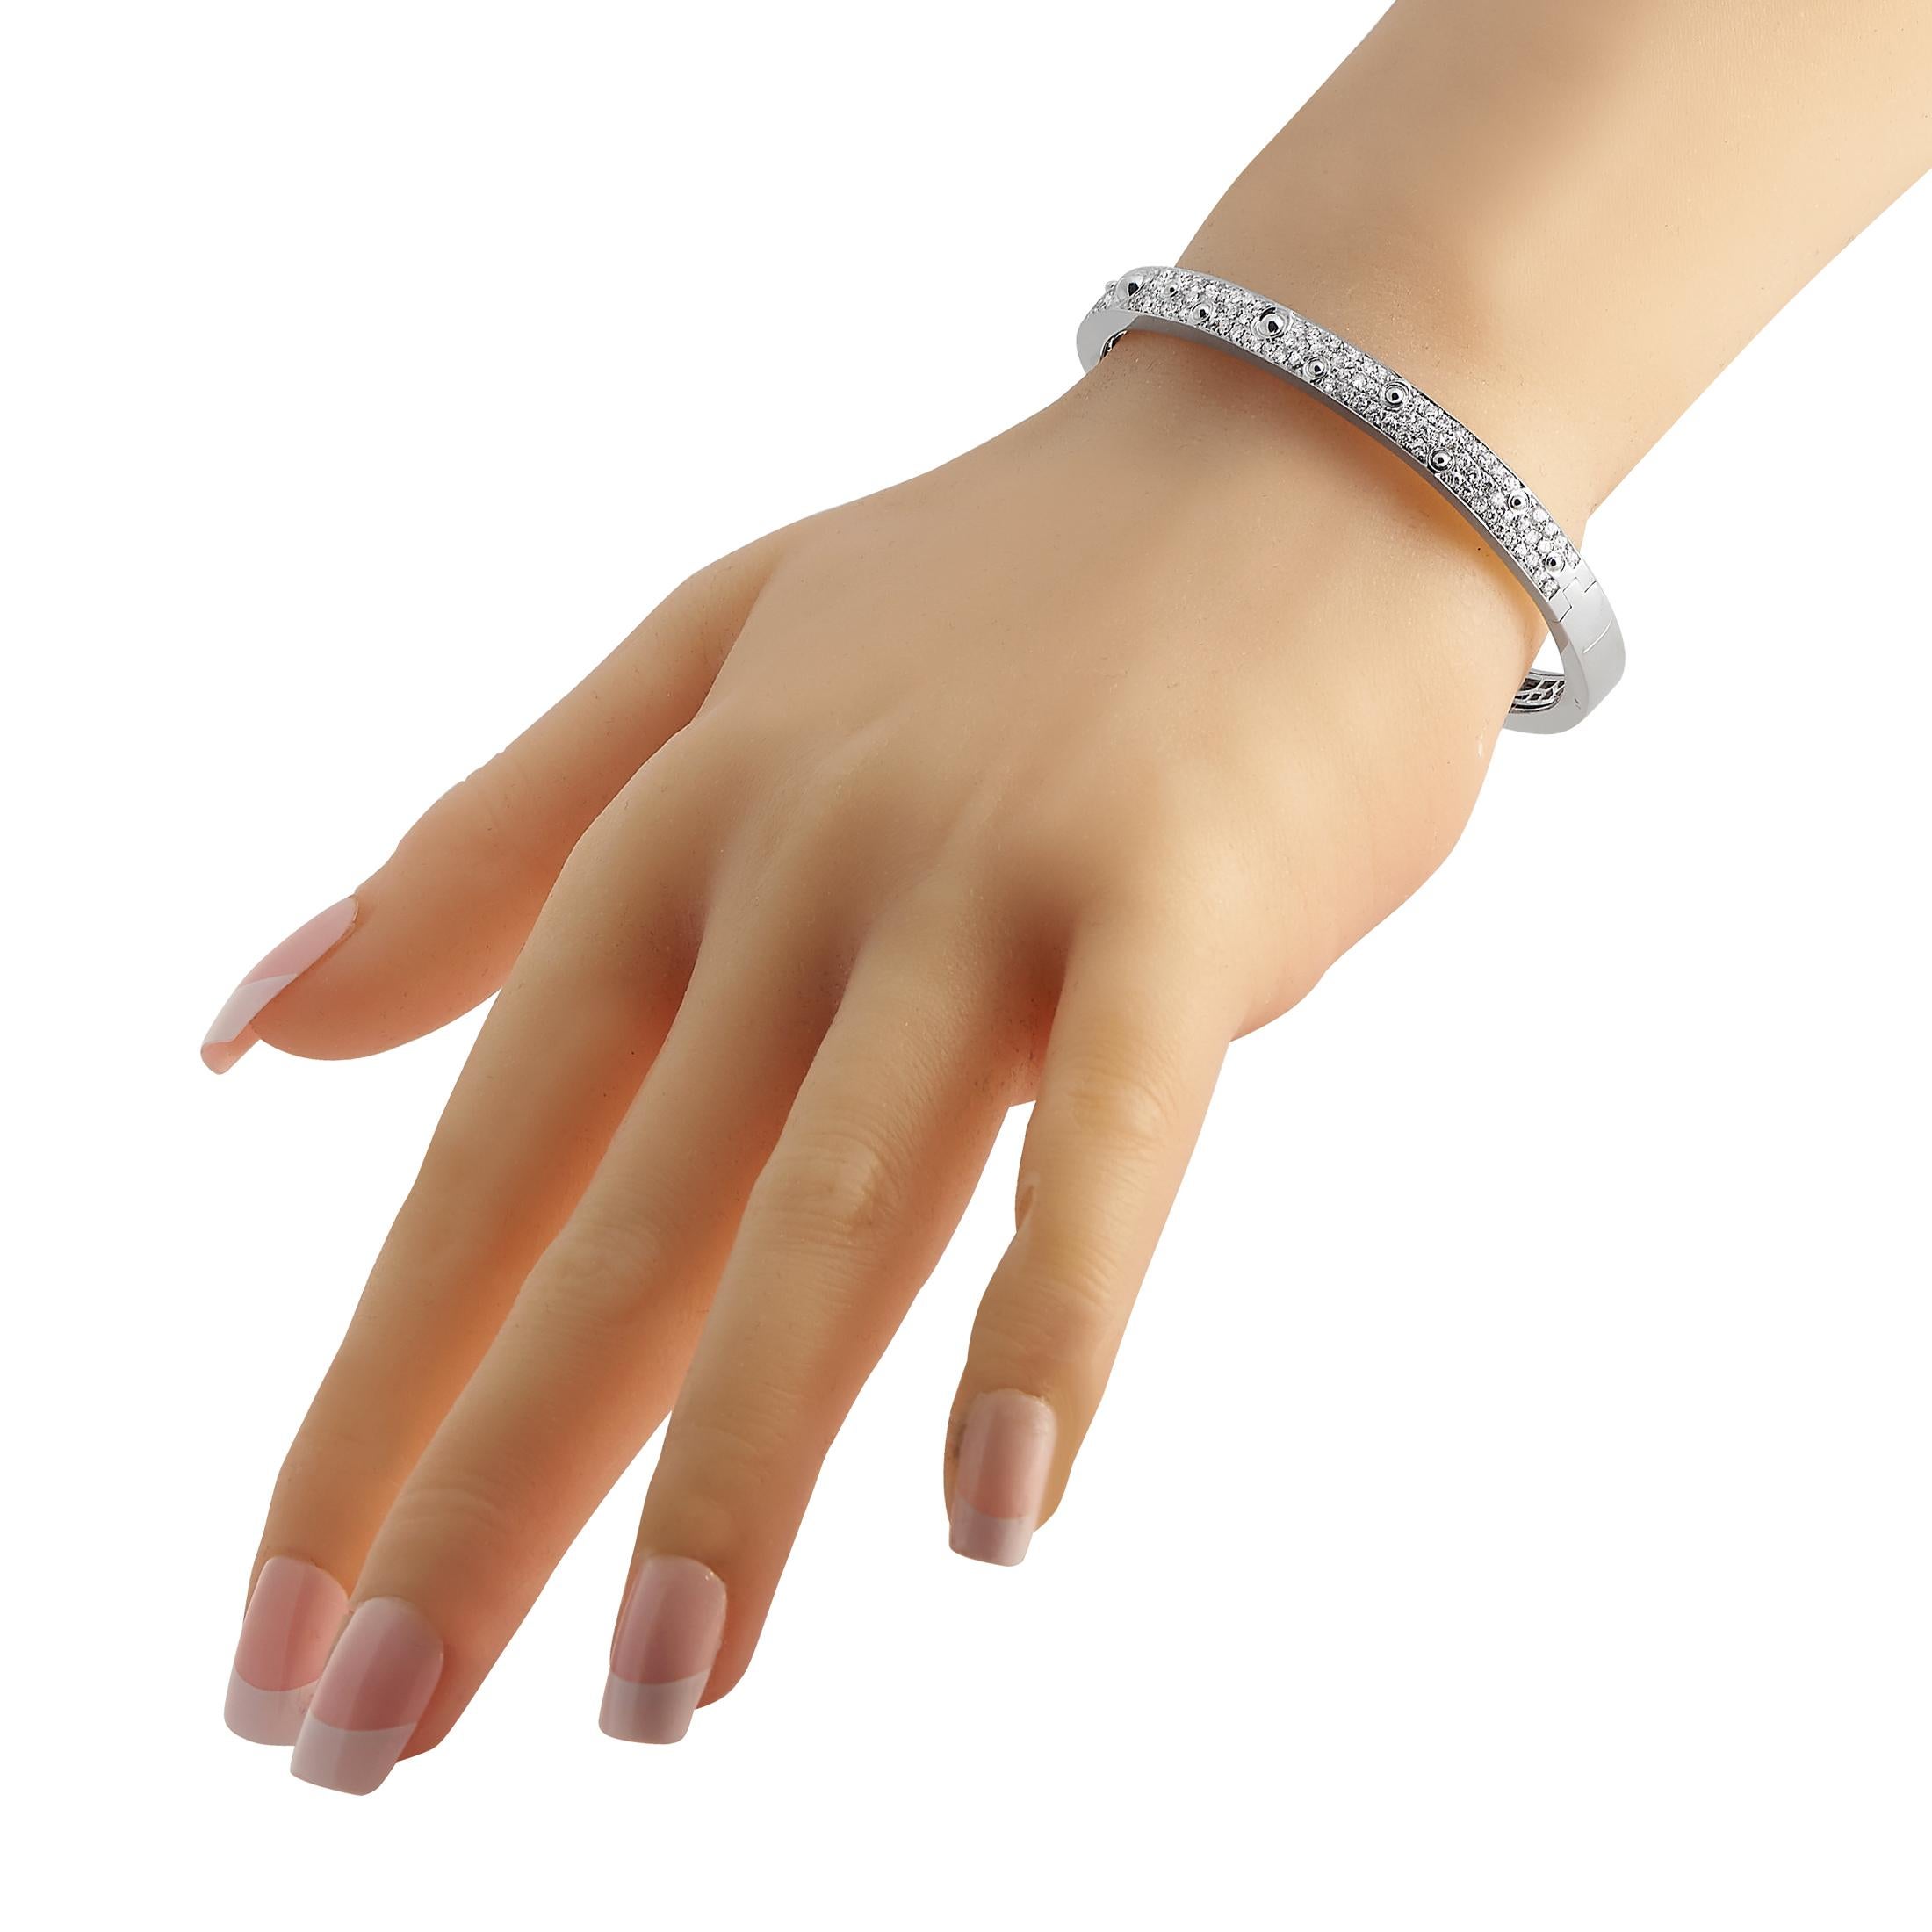 Here is something you can wear when you want to keep things simple and classy yet still sparkly. This solid bracelet is crafted in 18K white gold and has a box tab closure. It features petite round diamonds, punctuated on random spots with domed